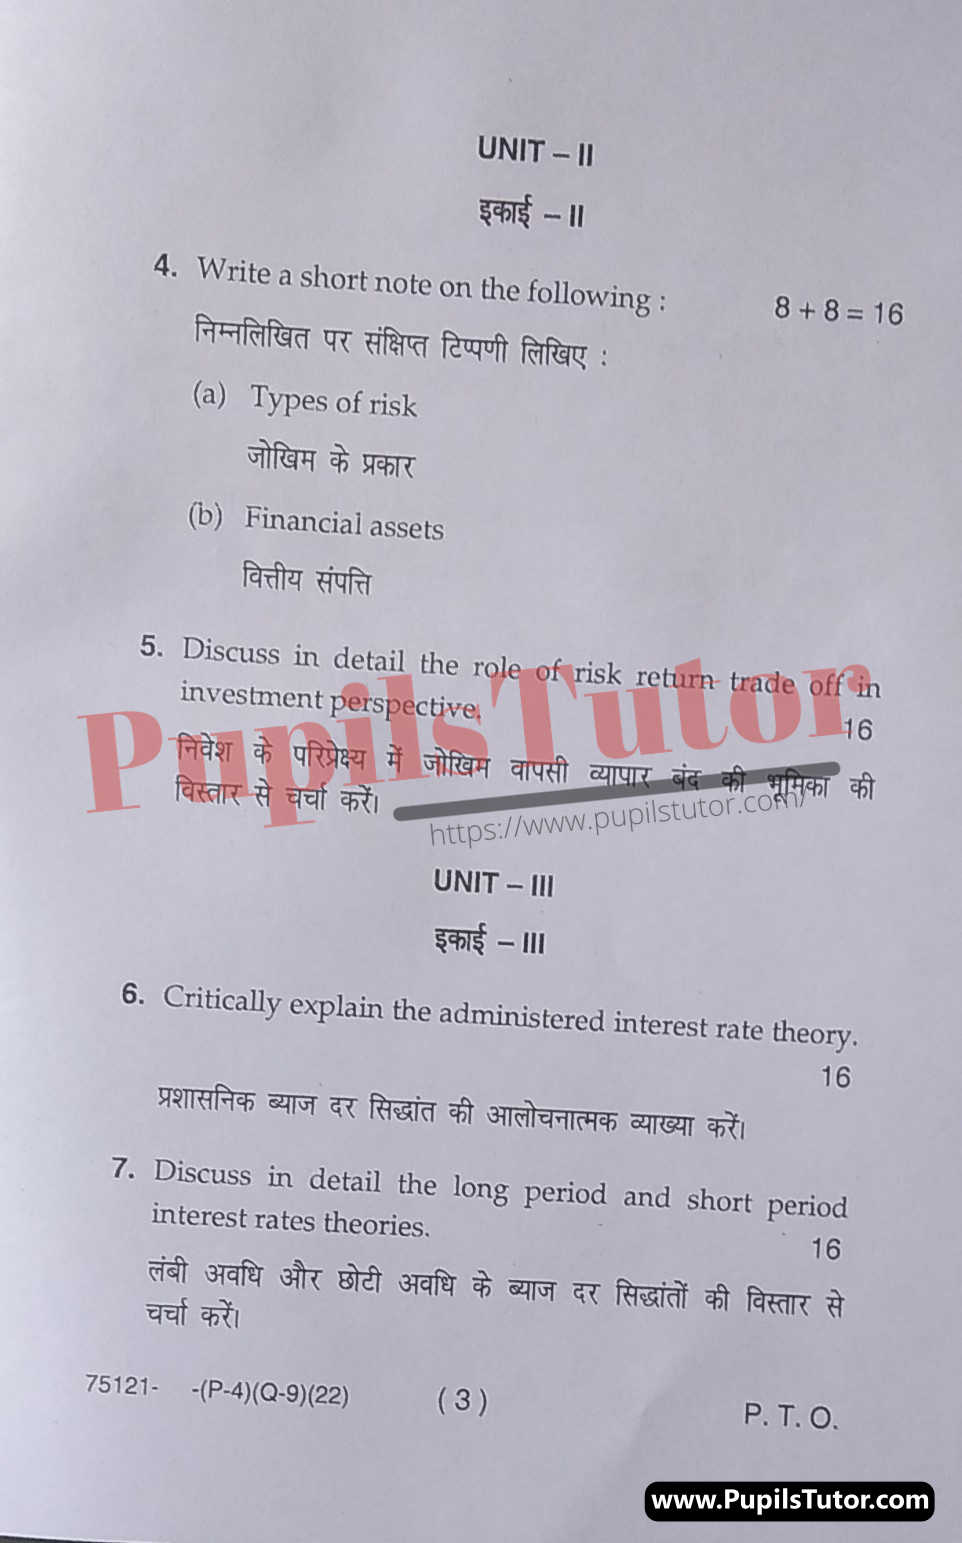 Free Download PDF Of M.D. University M.A. [Economics] Third Semester Latest Question Paper For Financial Institutions And Markets Subject (Page 3) - https://www.pupilstutor.com